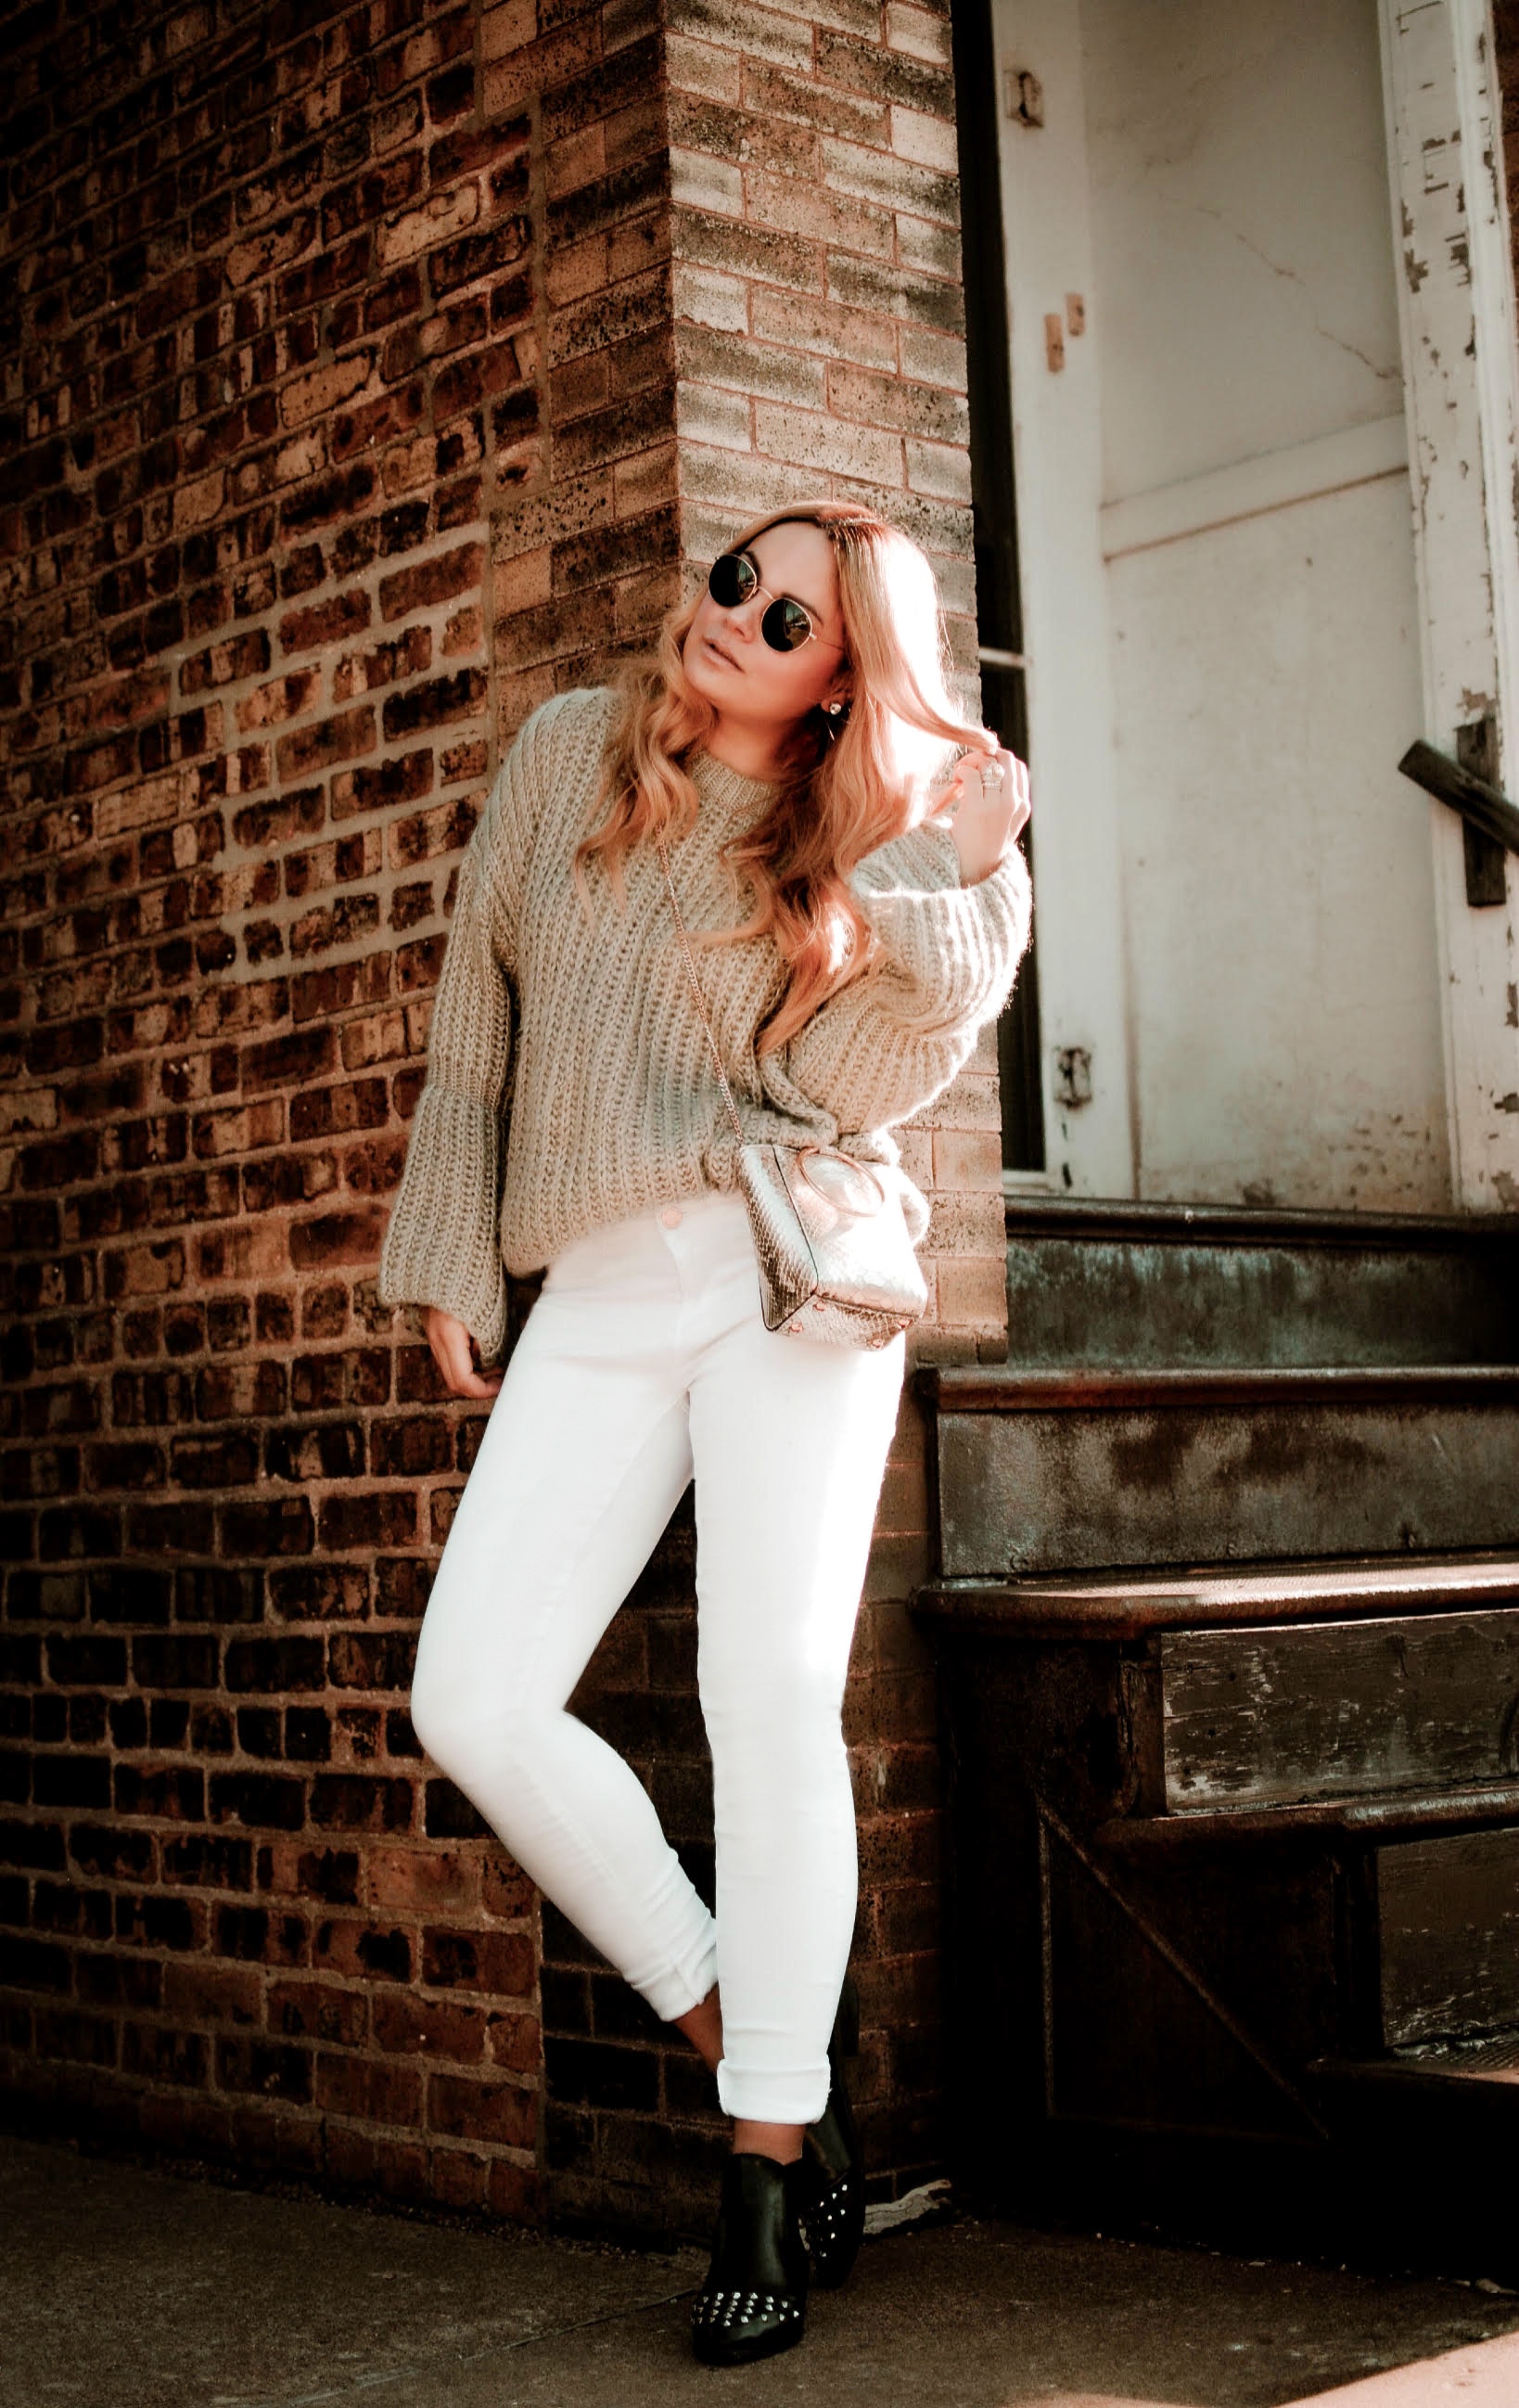  Vanessa-Lambert-What-Would-V-Wear-White-Jeans-Cozy-Sweater-Winter-2018